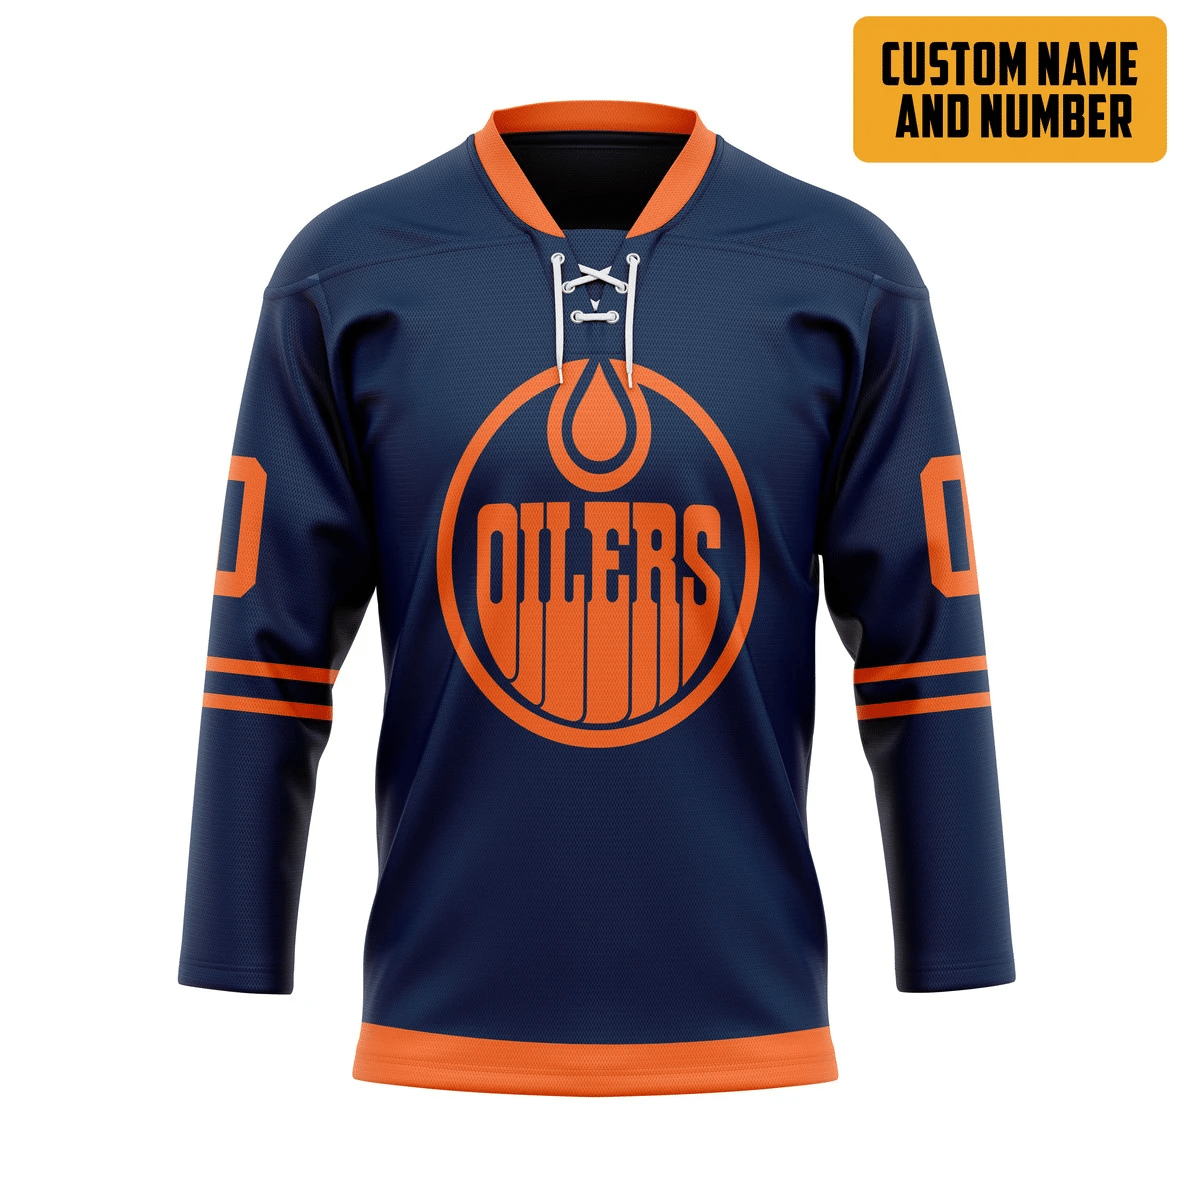 The hockey jersey is one of the most important items to have as a sports fan. 163